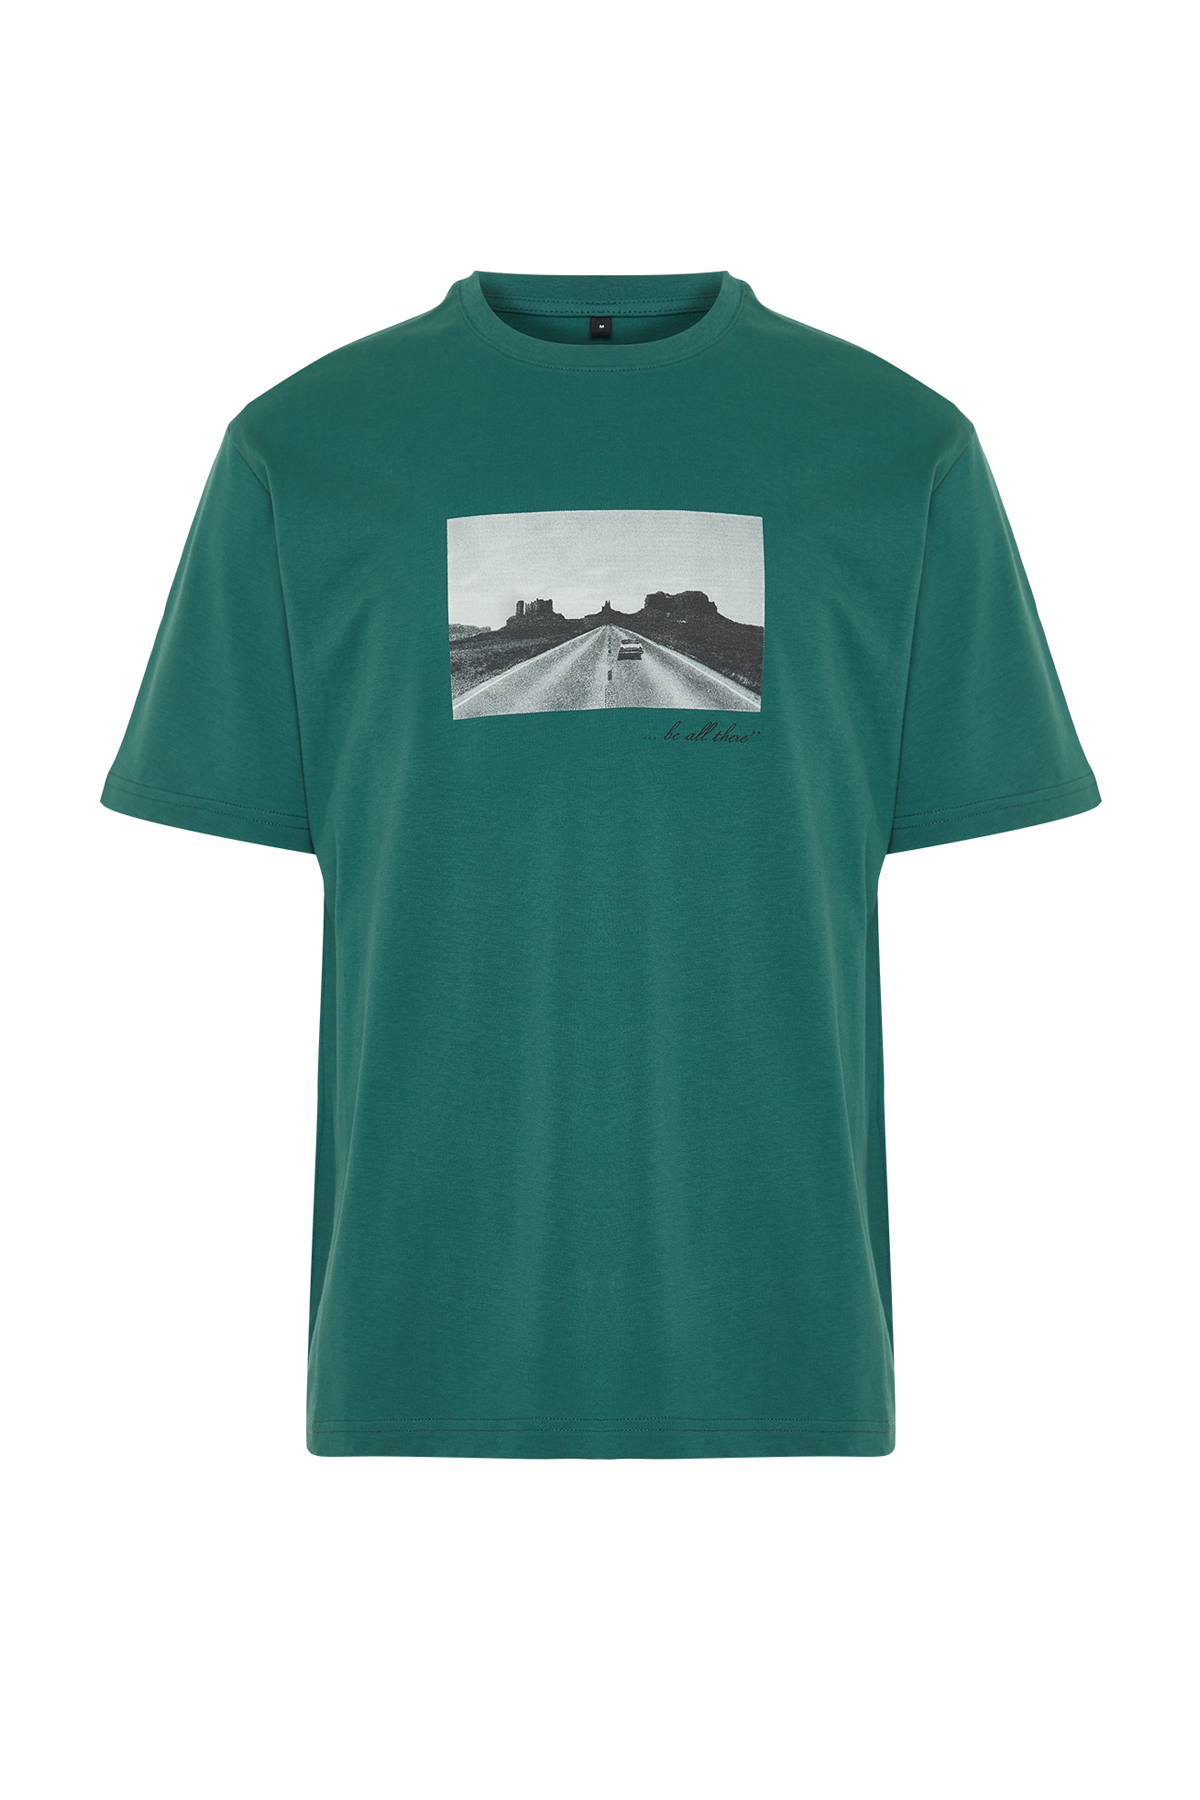 Trendyol Emerald Green Relaxed/Comfortable Cut Photo Printed 100% Cotton T-shirt